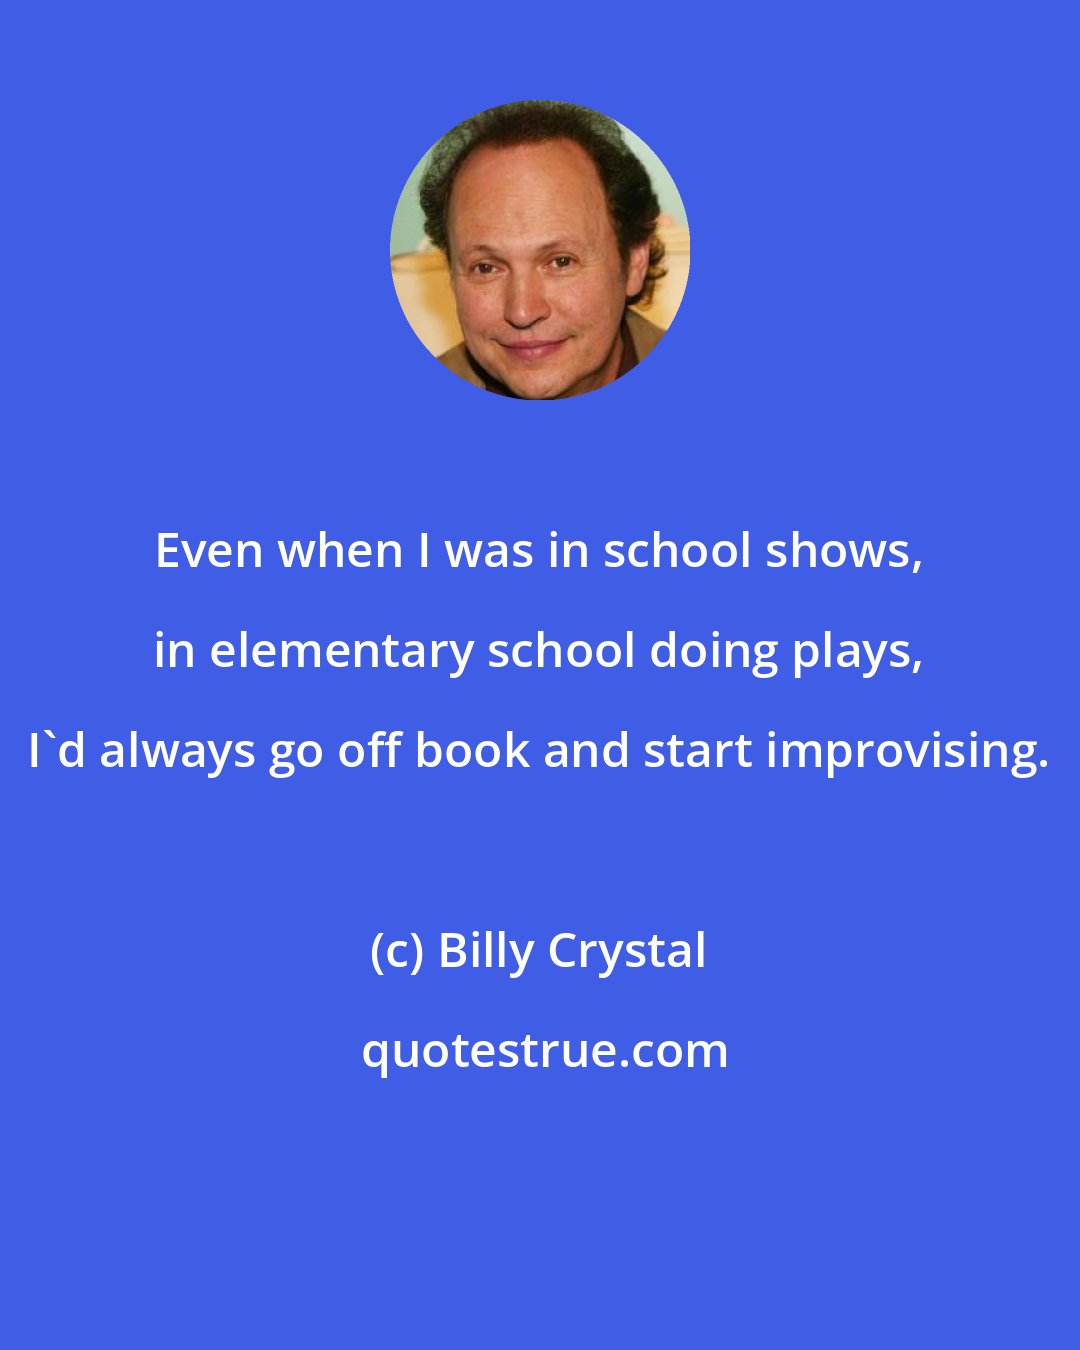 Billy Crystal: Even when I was in school shows, in elementary school doing plays, I'd always go off book and start improvising.